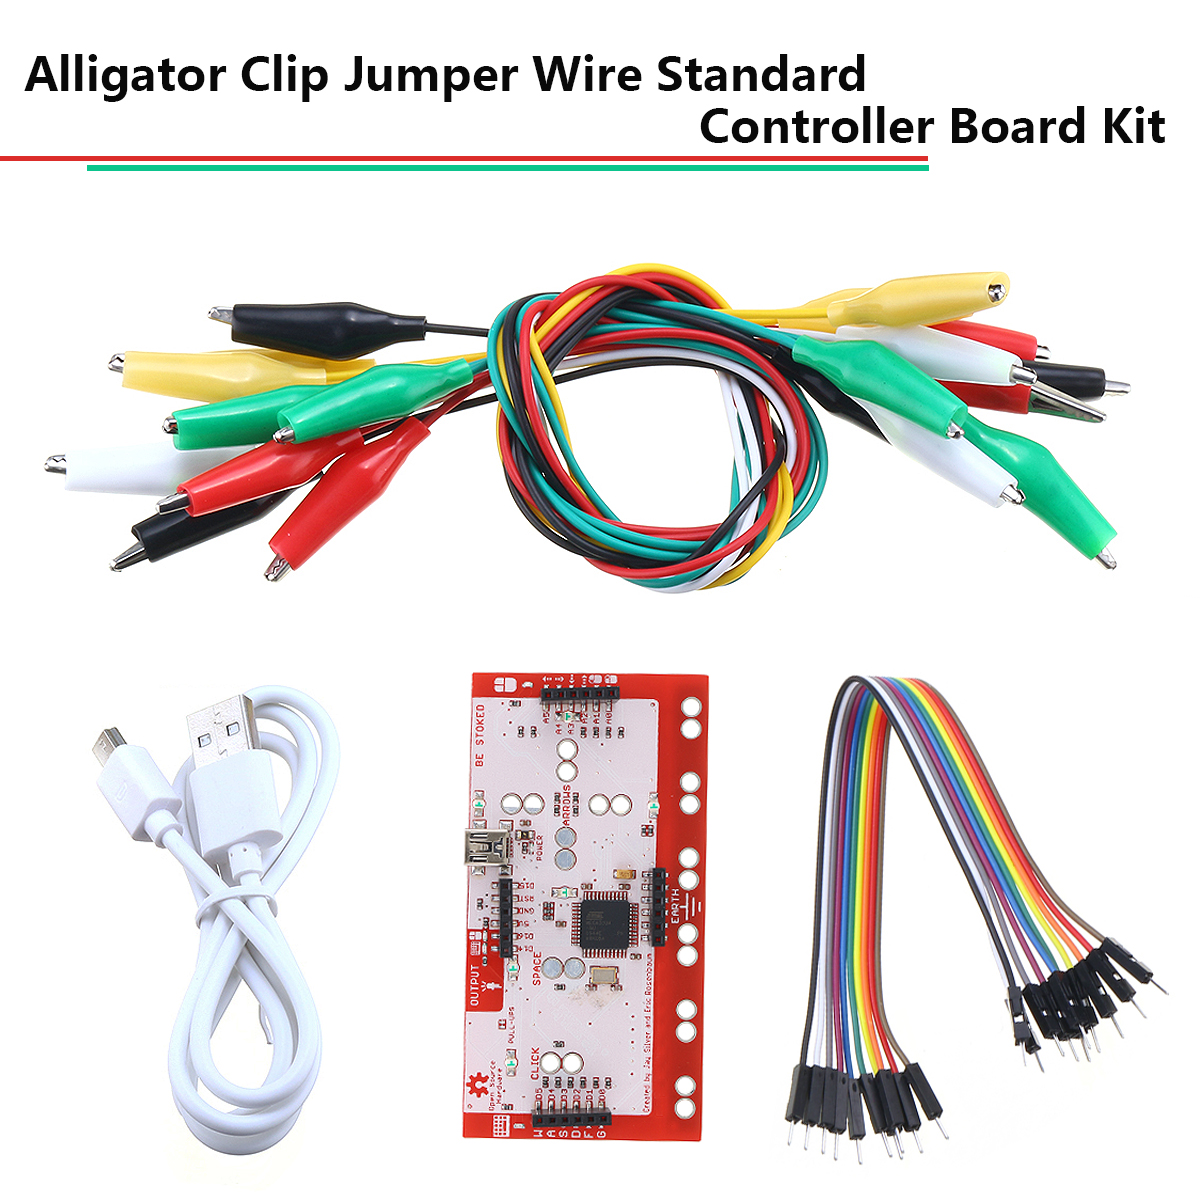 Alligator Clip Jumper Wire Standard Controller Board Kit for Makey Makey Science Toy 9